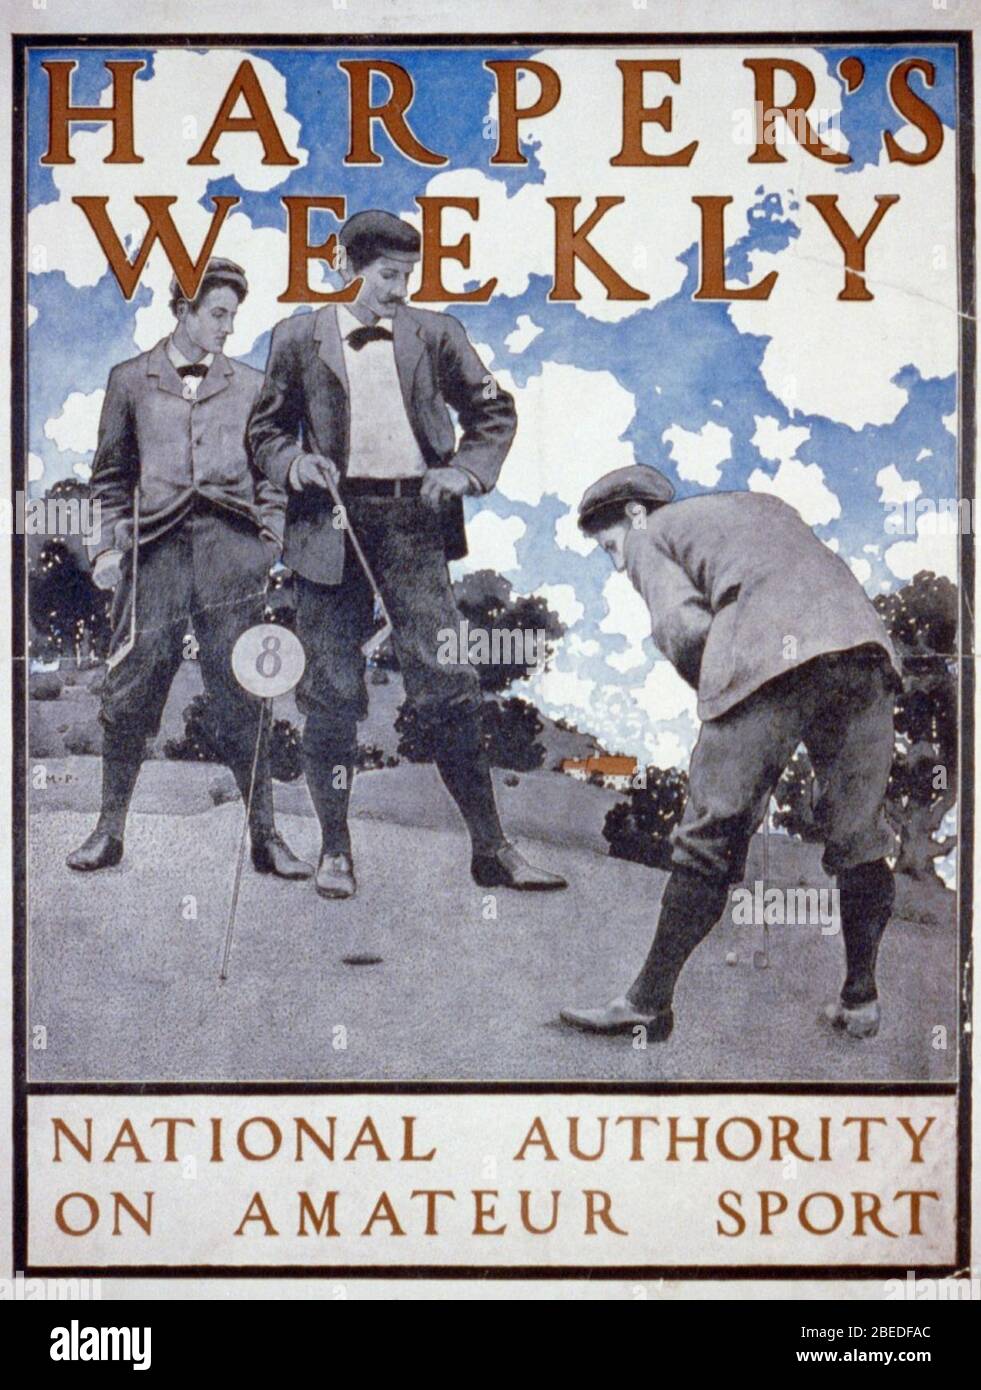 Harper's Weekly. National authority on amateur sport - Maxfield Parrish Stock Photo